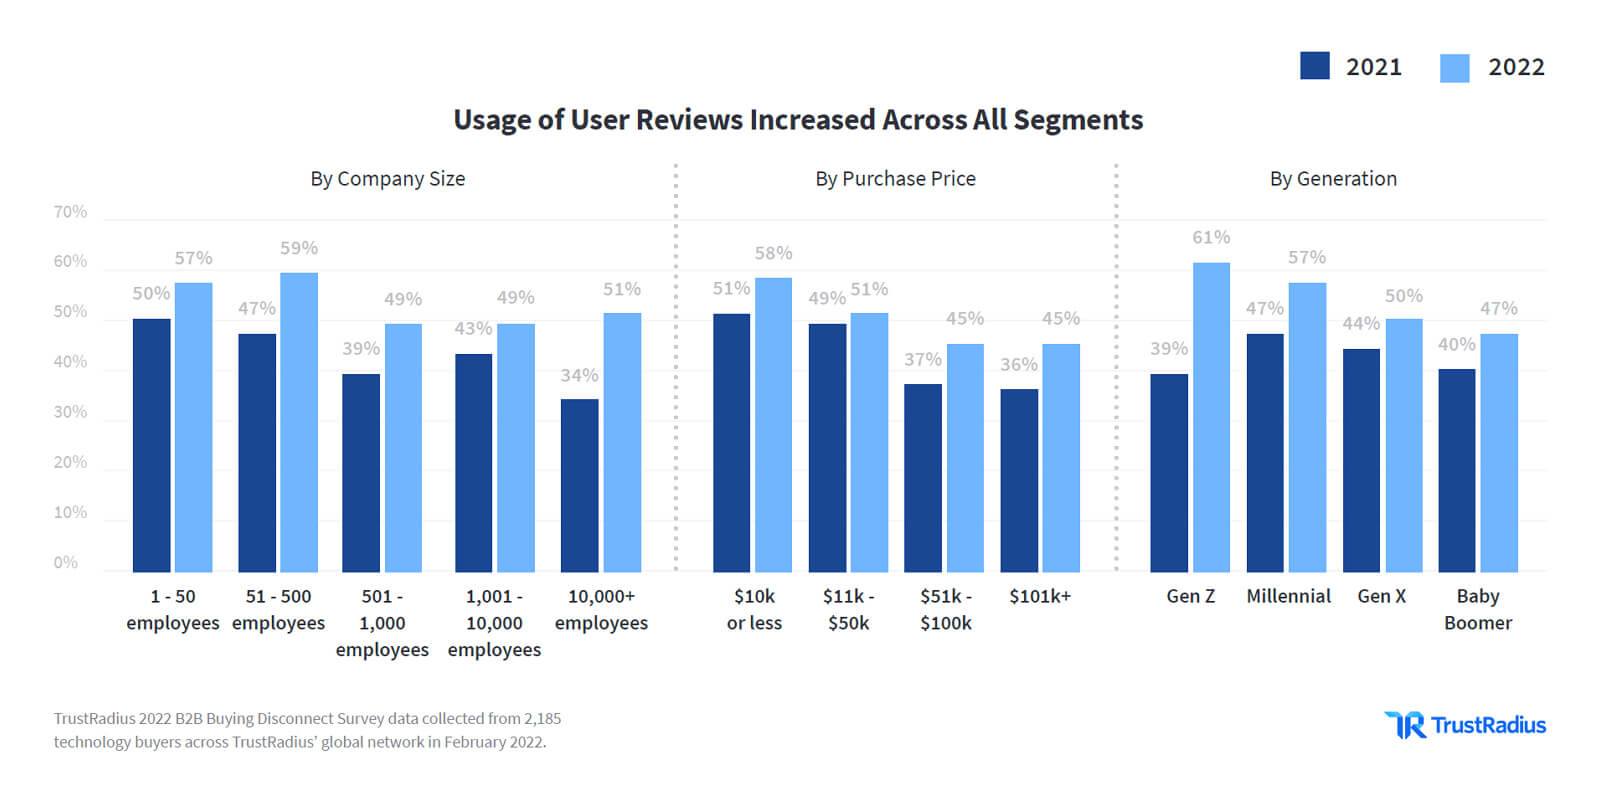 usdage of user reviews across all segments